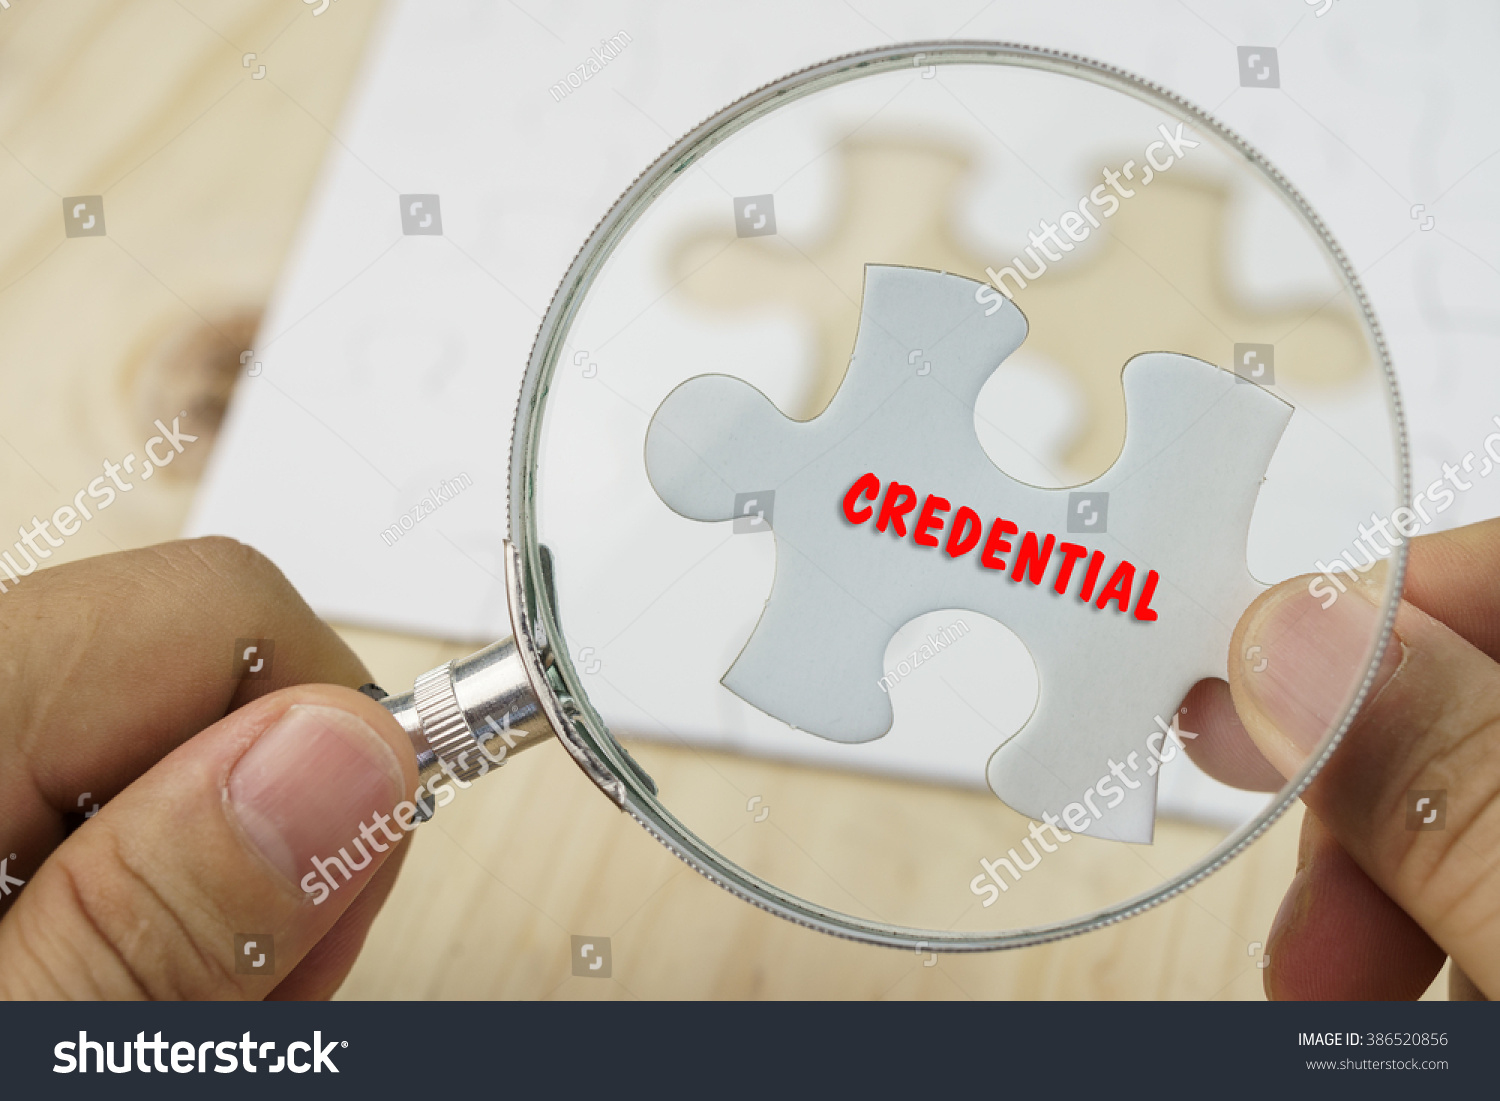 Business concept.Hand with magnifying glass searching for a piece of jigsaw puzzle with CREDENTIAL word. #386520856